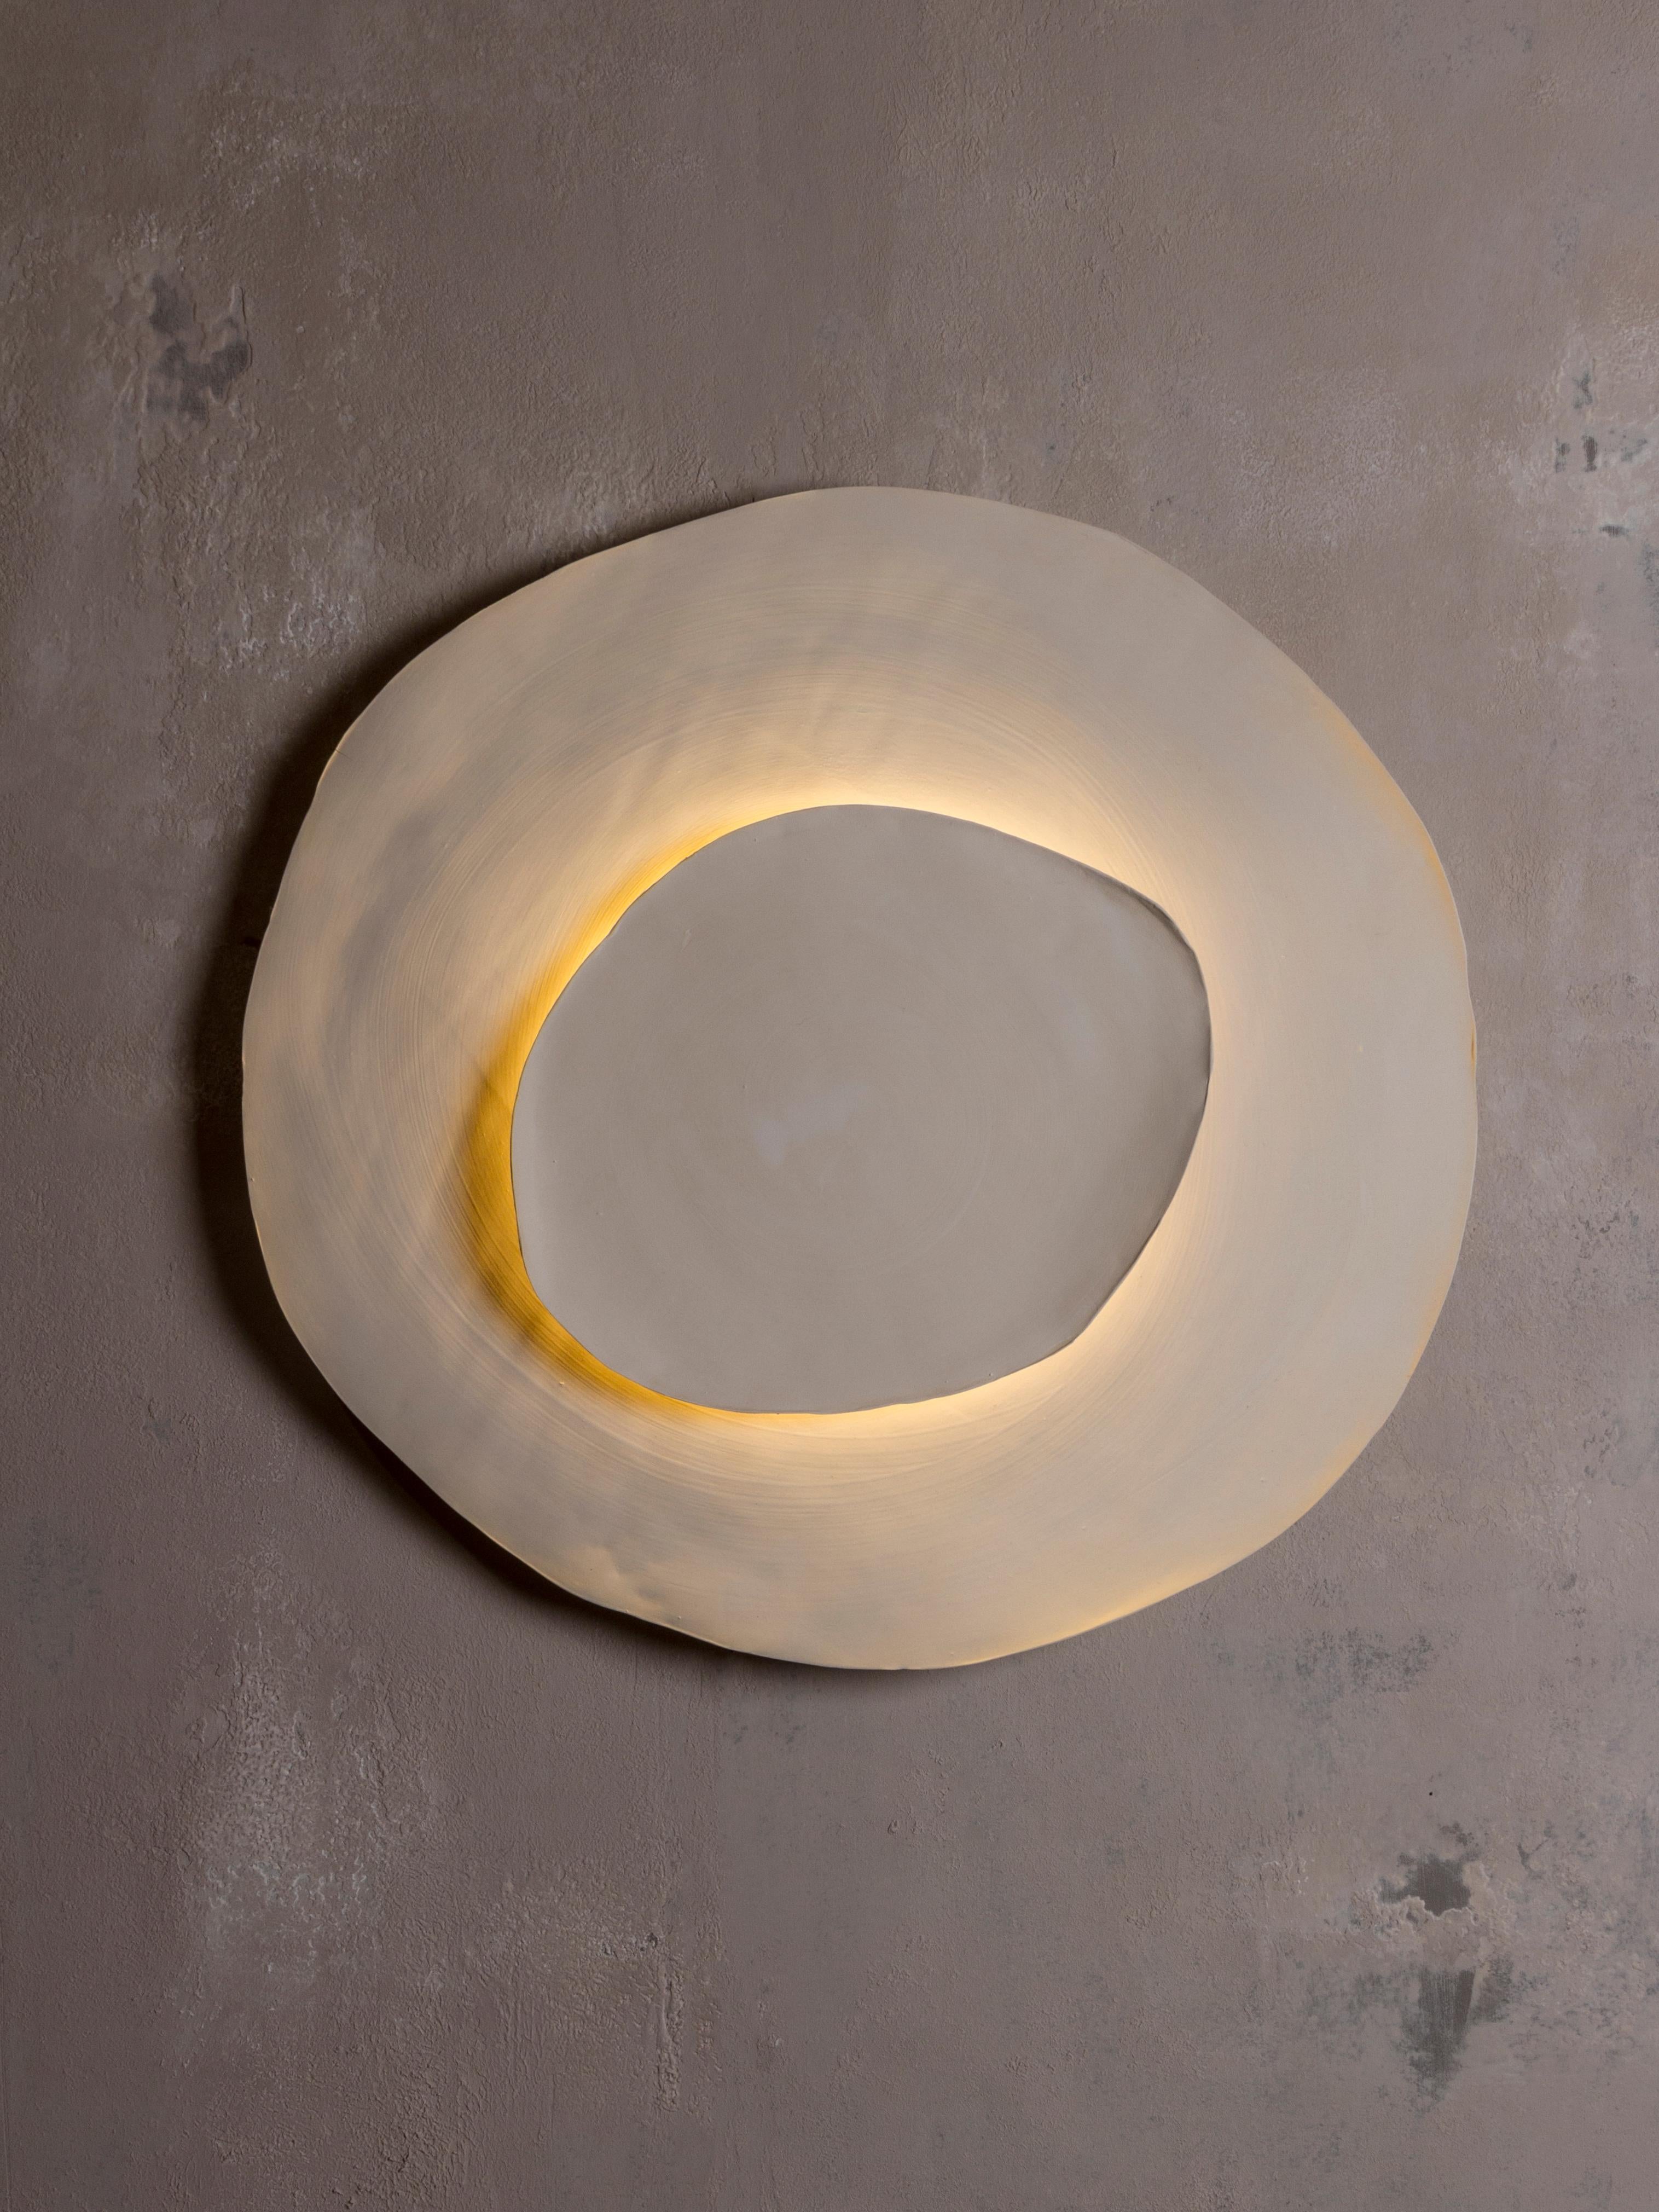 Silk #17 wall light by Margaux Leycuras
One of a Kind. Signed and numbered.
Dimensions: Ø 51 x H 56 cm.
Material: Ceramic, sandy stoneware platters with a porcelain slip finish.
The piece is signed, numbered and delivered with a certificate of